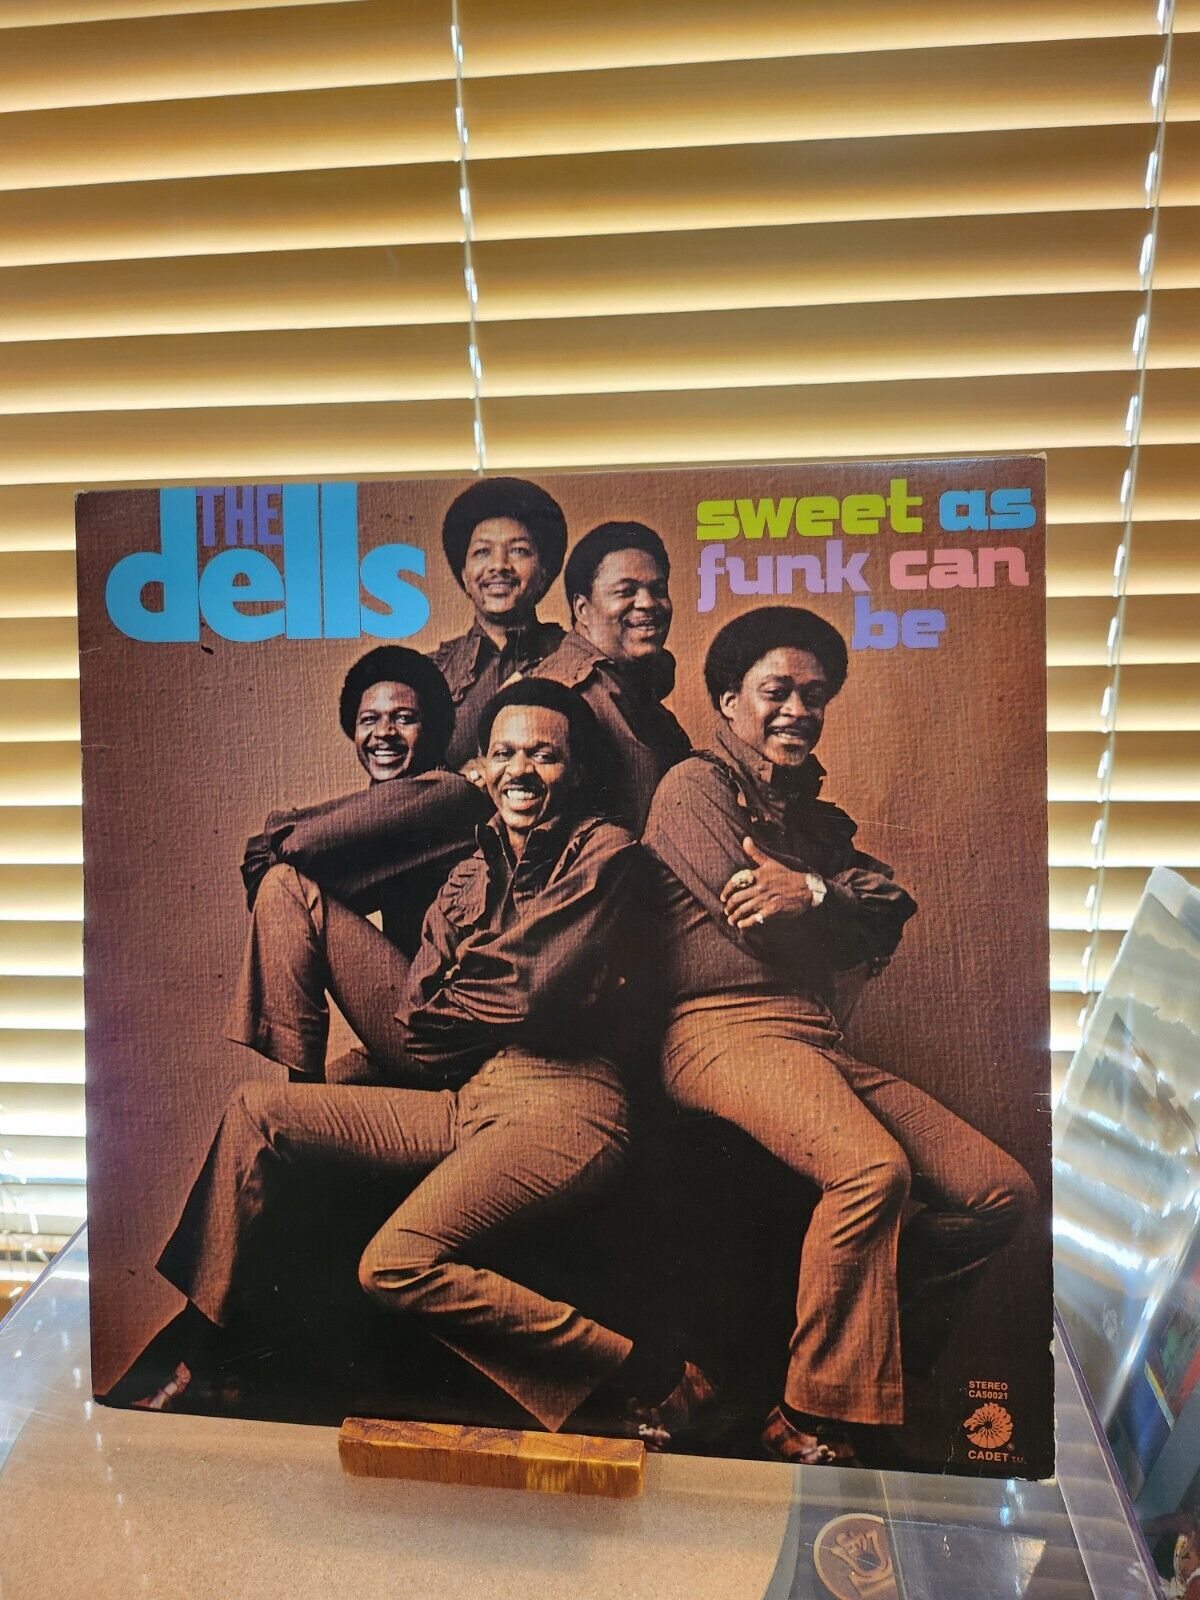 The Dells, Sweet As Funk Can Be, 1972 1st Cadet Stereo, CA 50021, VG+/VG+